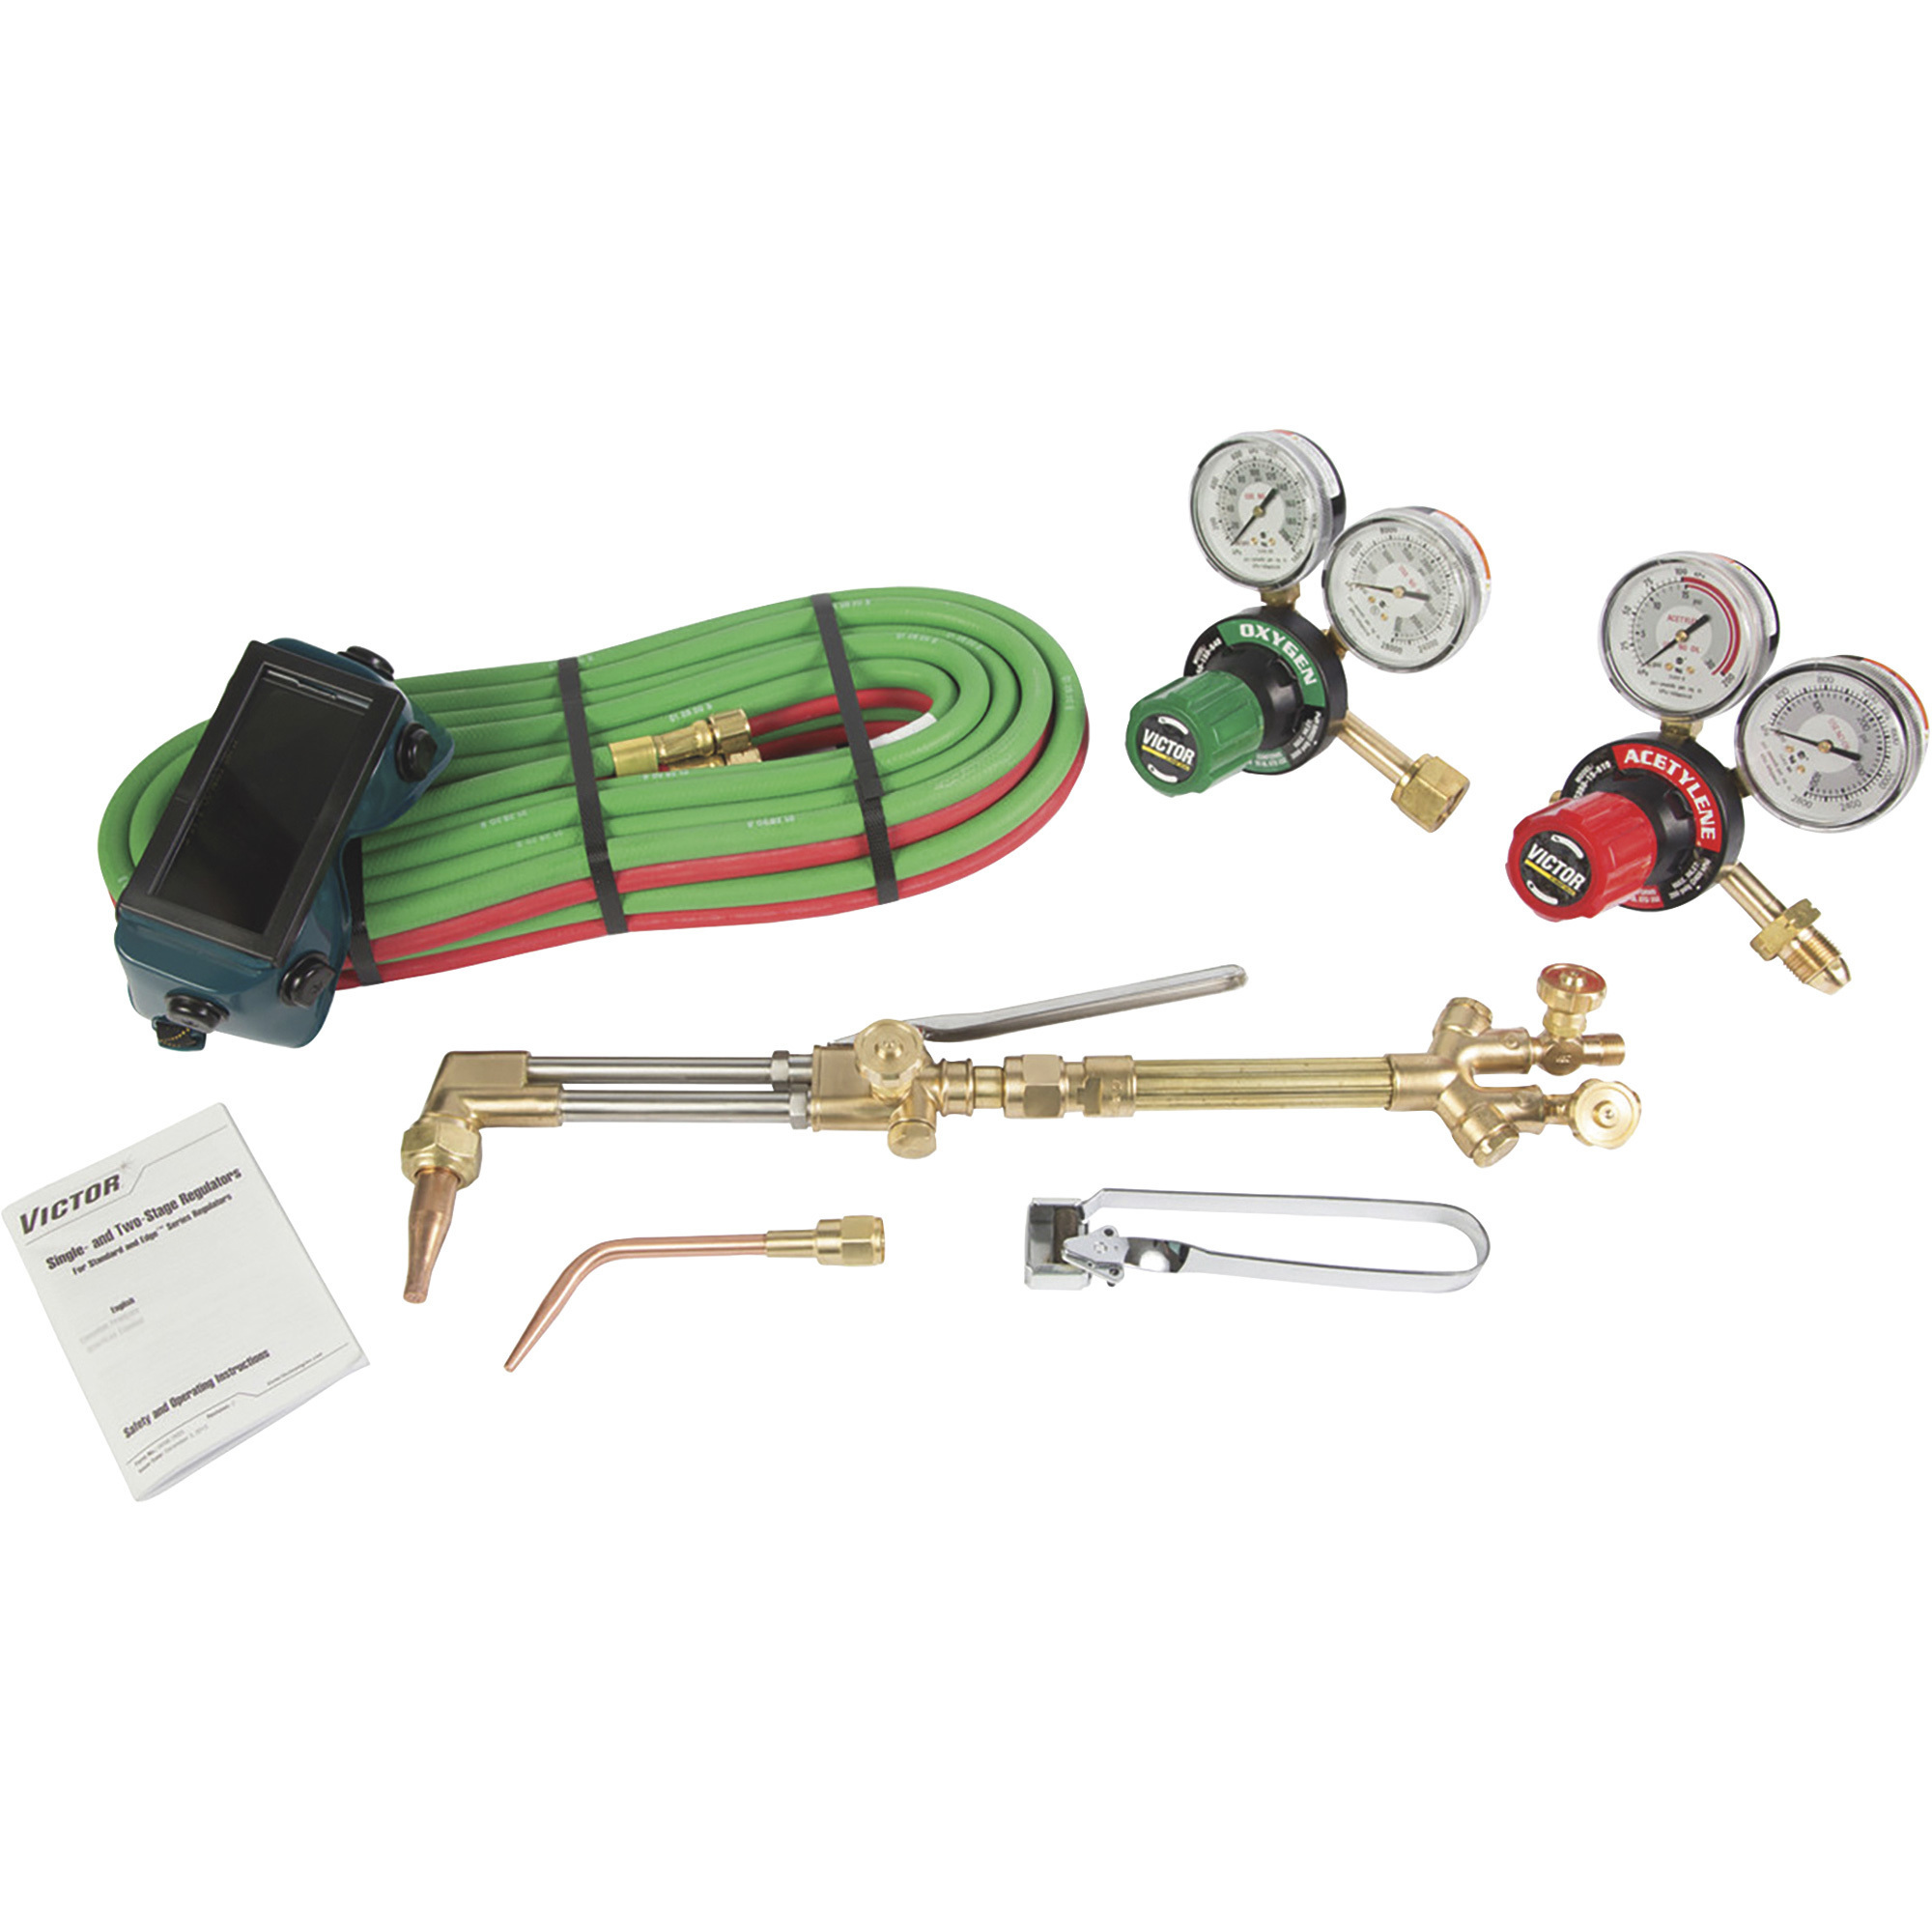 Victor Medalist G350 Classic Welding and Cutting Kit â Model 0384-2698